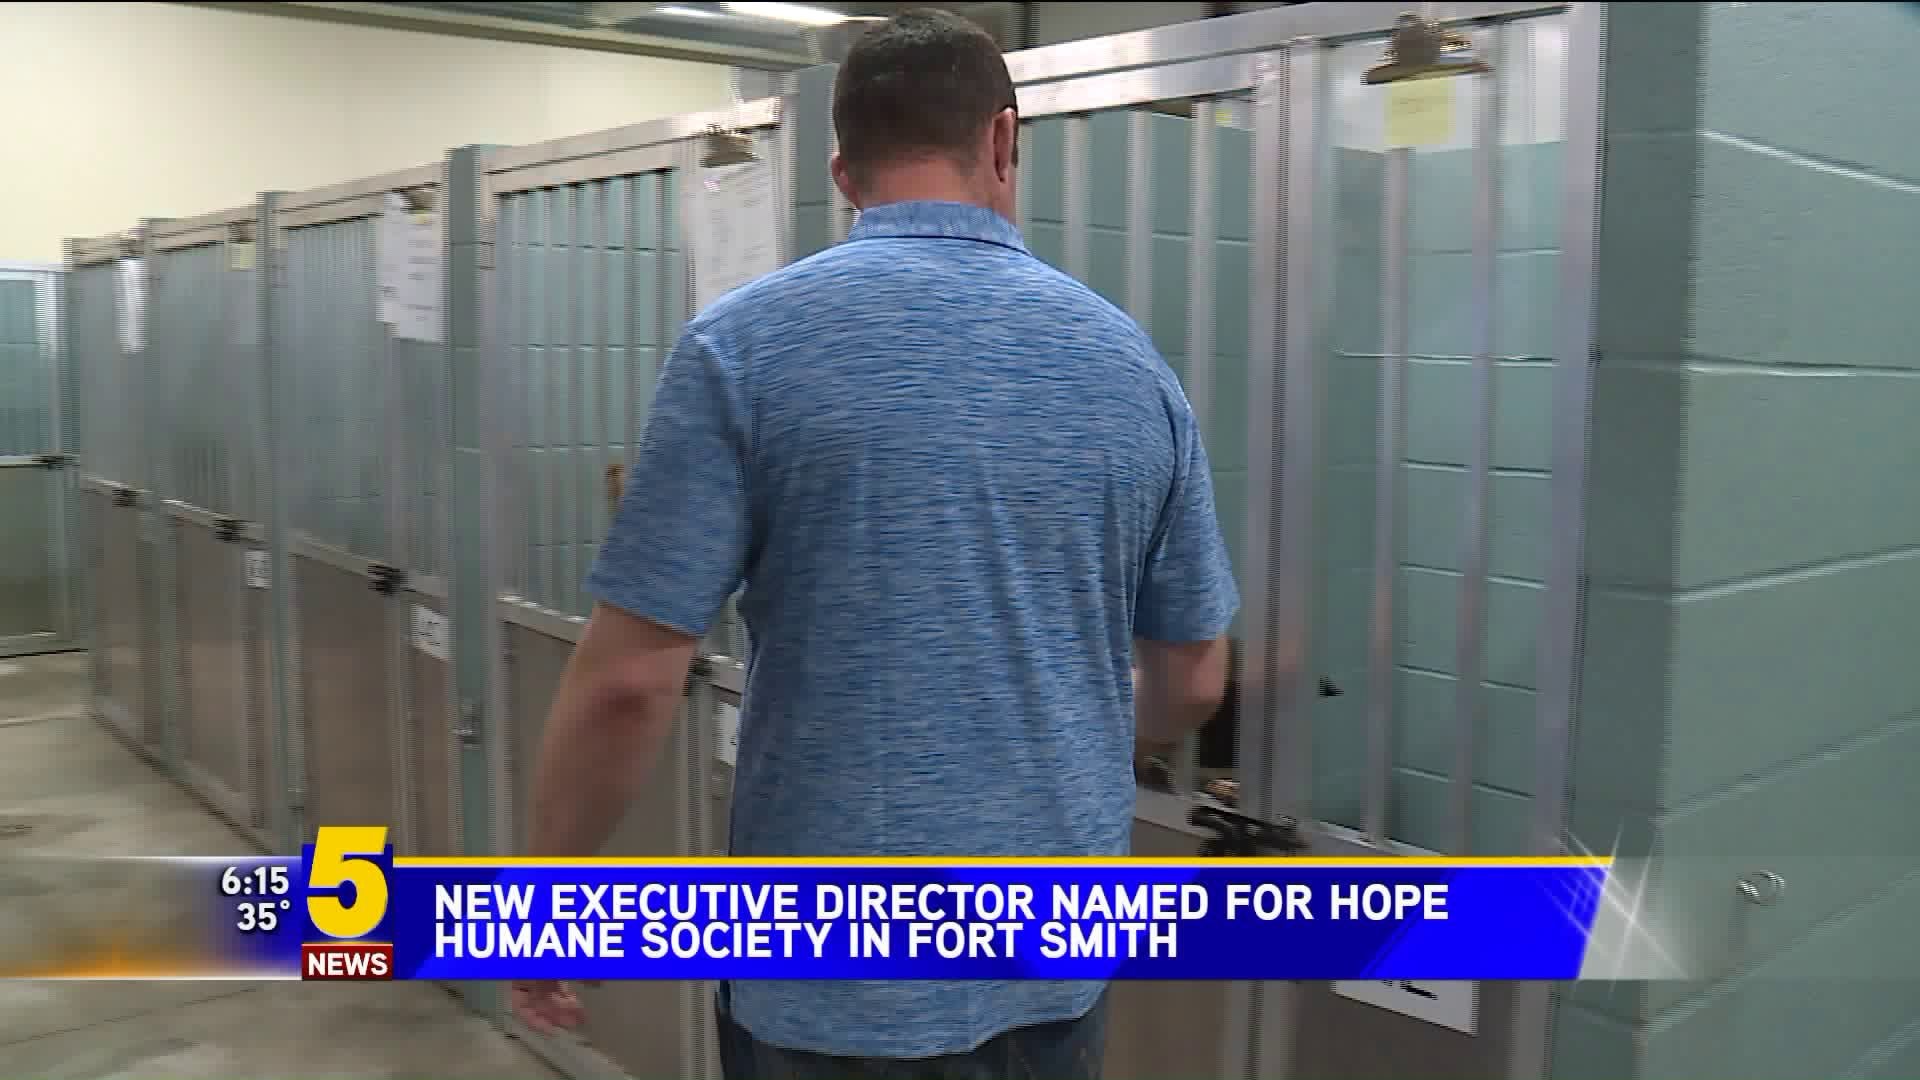 New Executive Director Named For Hope Humane Society In Fort Smith